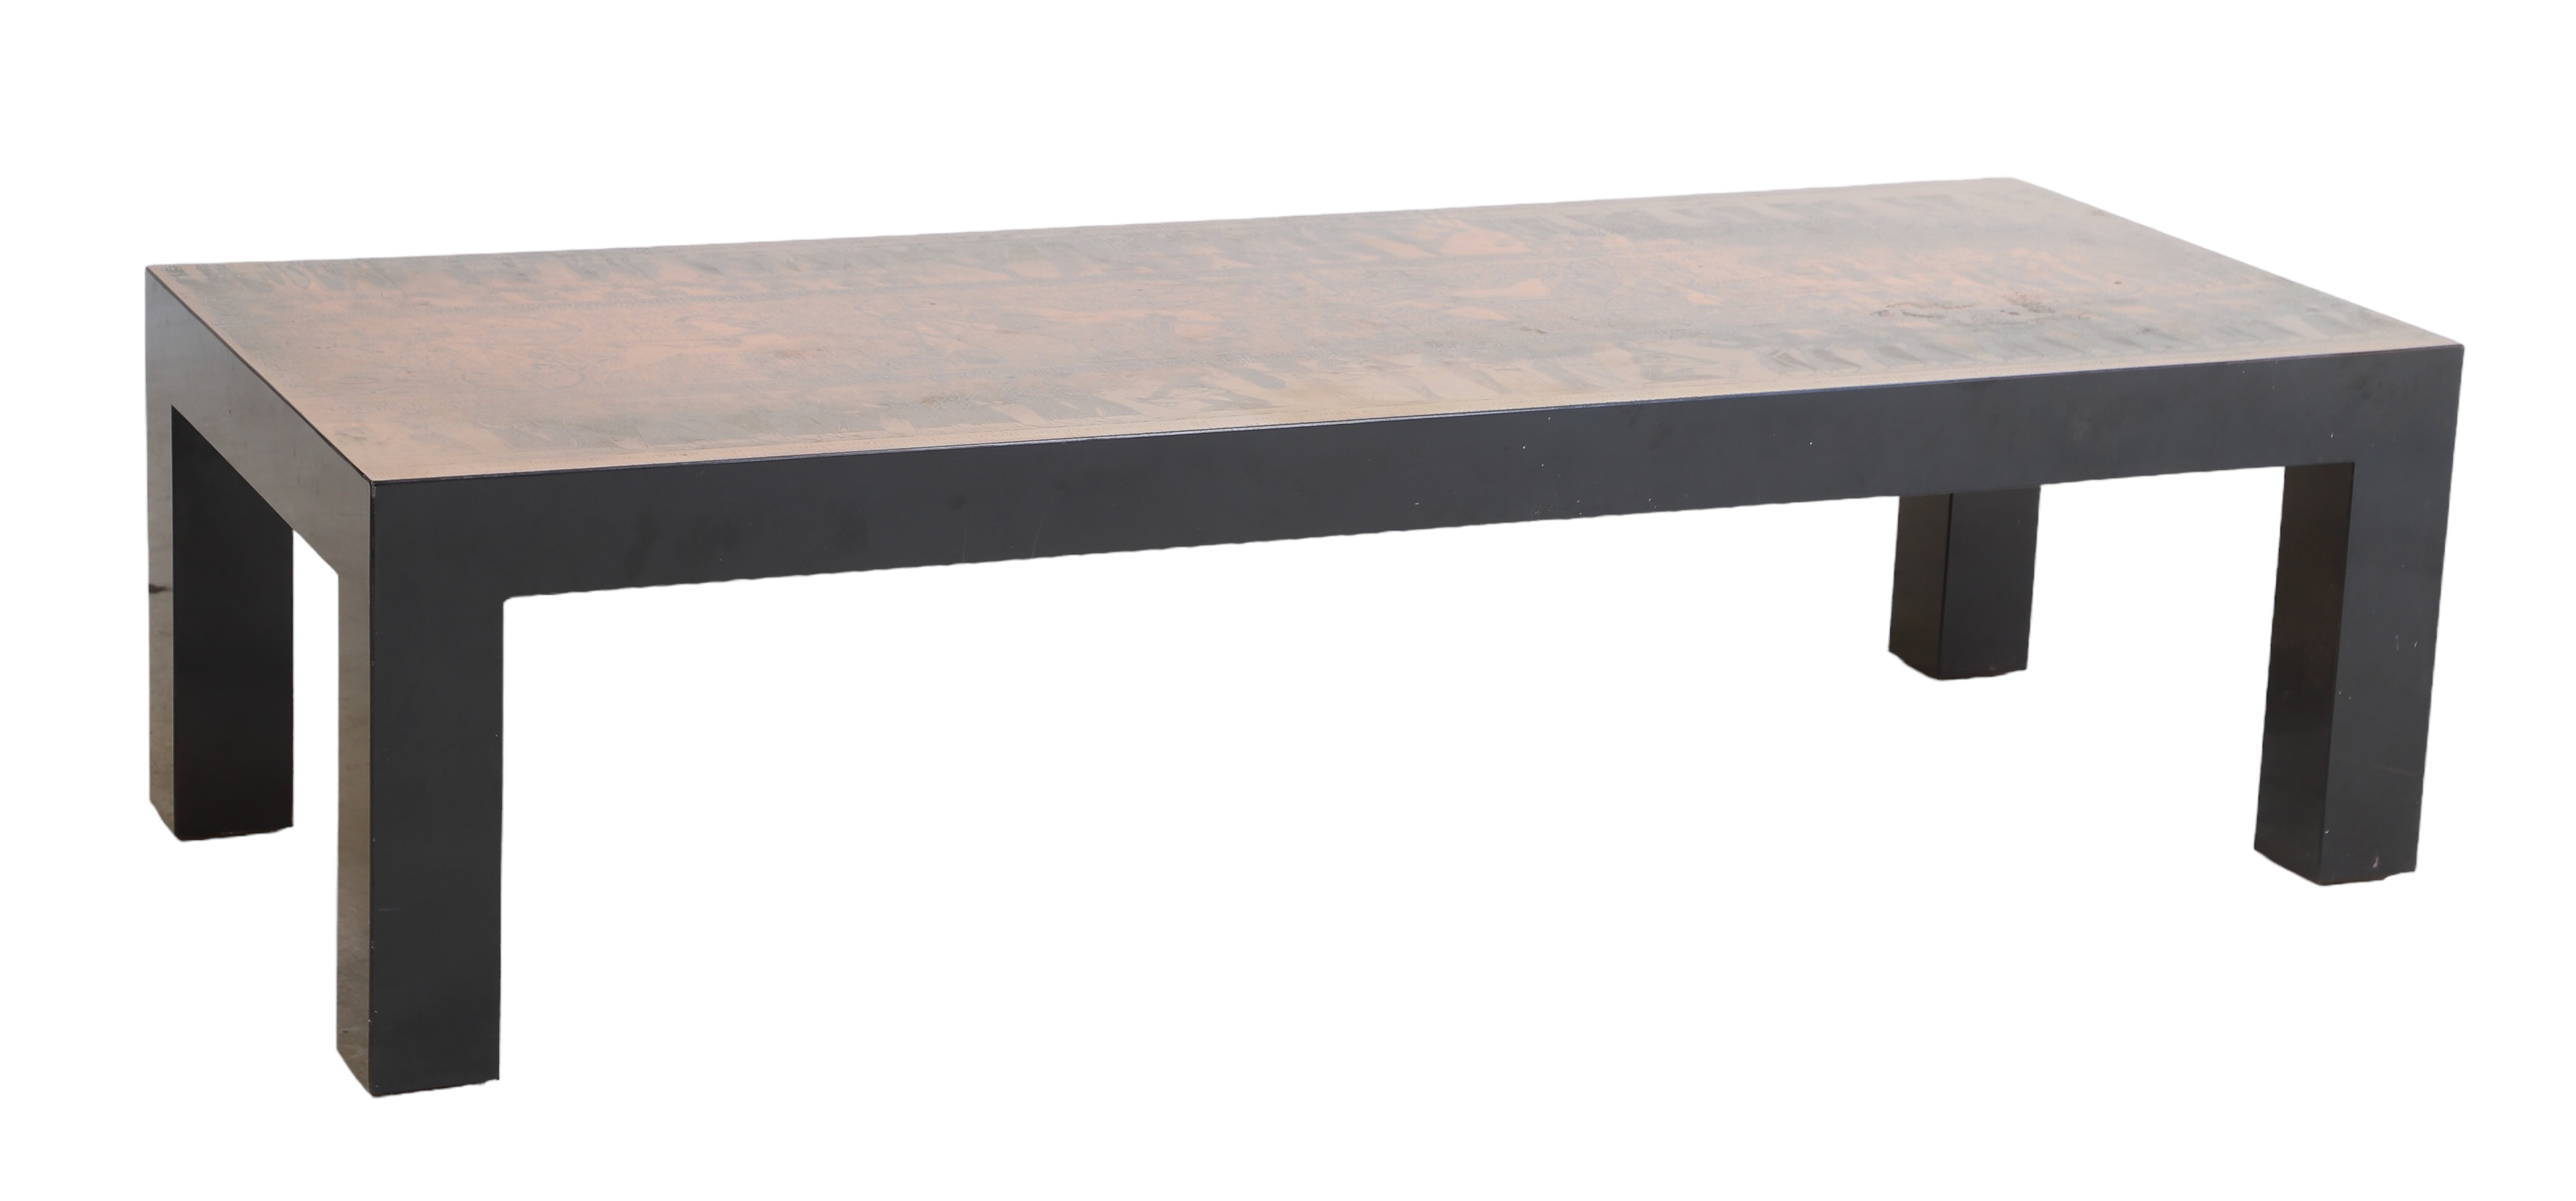 Ebonized and embossed coffee table  3b3938